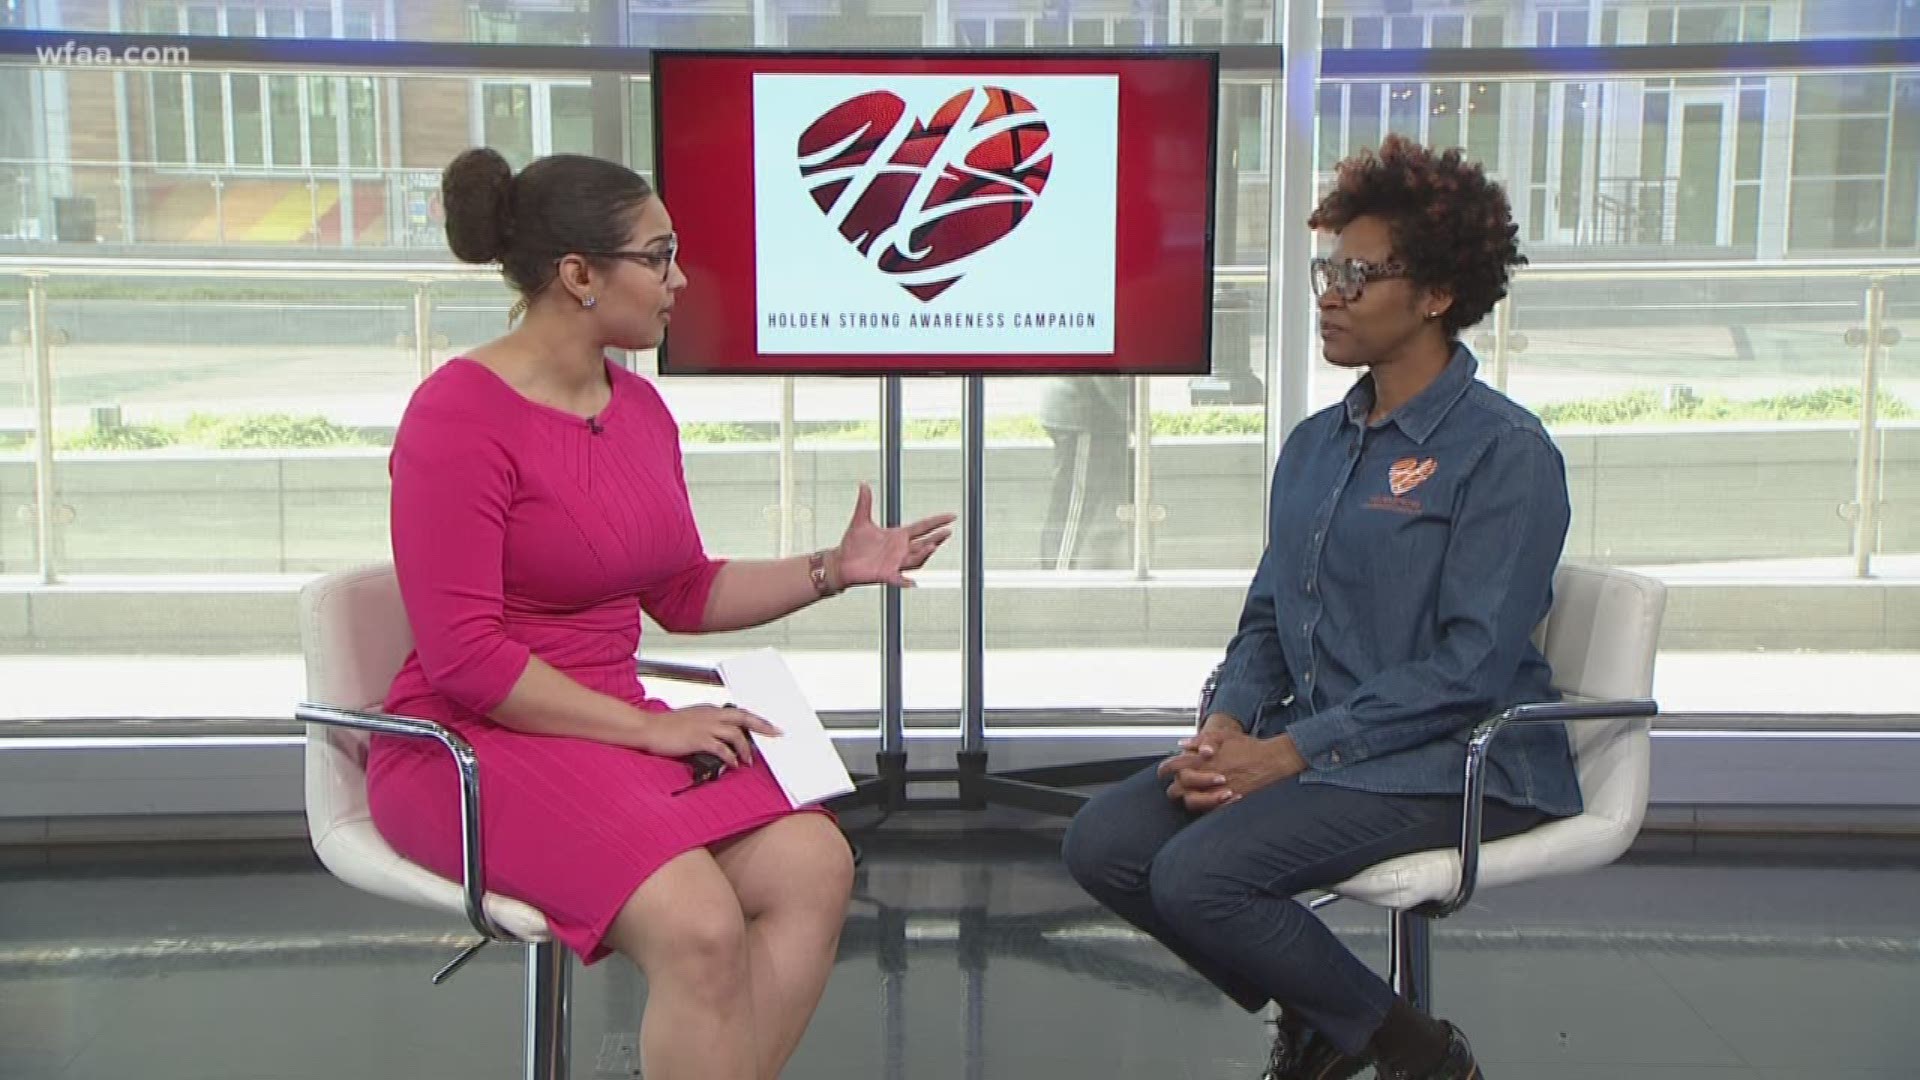 She nearly lost her son when he collapsed on the basketball court. Now one North Texas mother is making it her mission to help all young athletes get heart screenings.